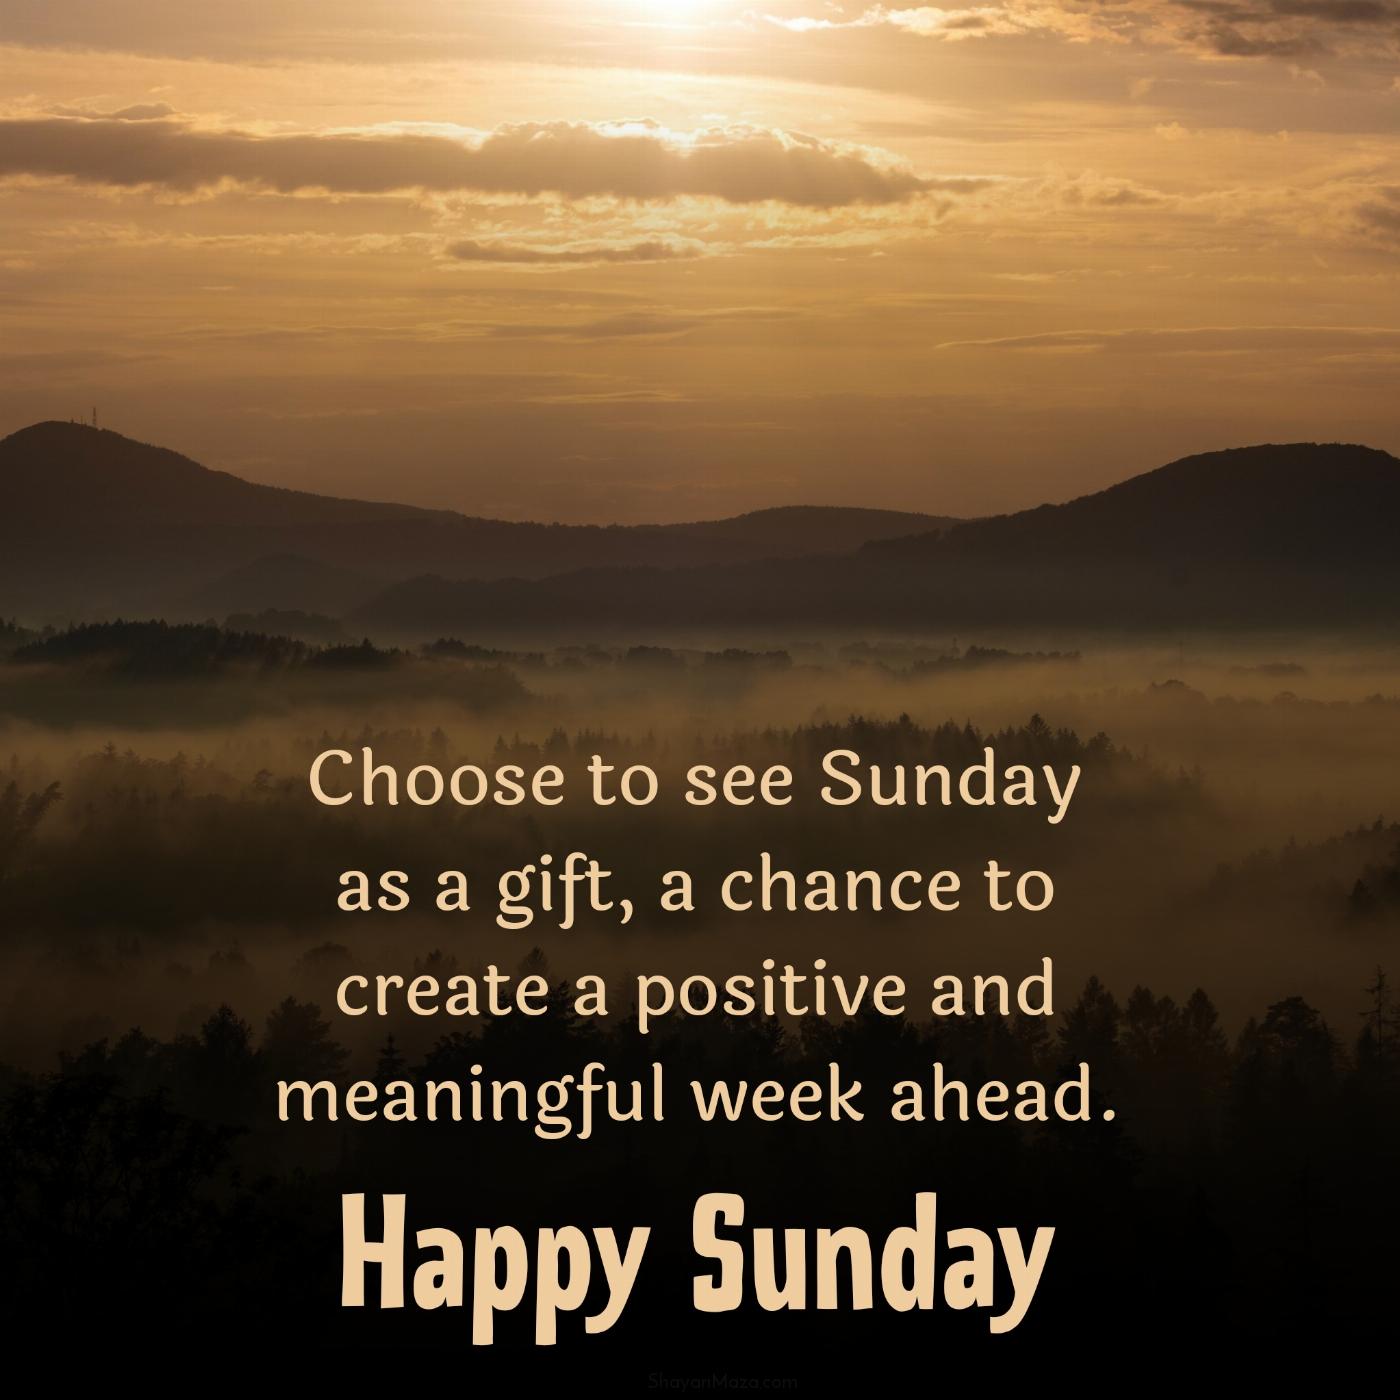 Choose to see Sunday as a gift a chance to create a positive